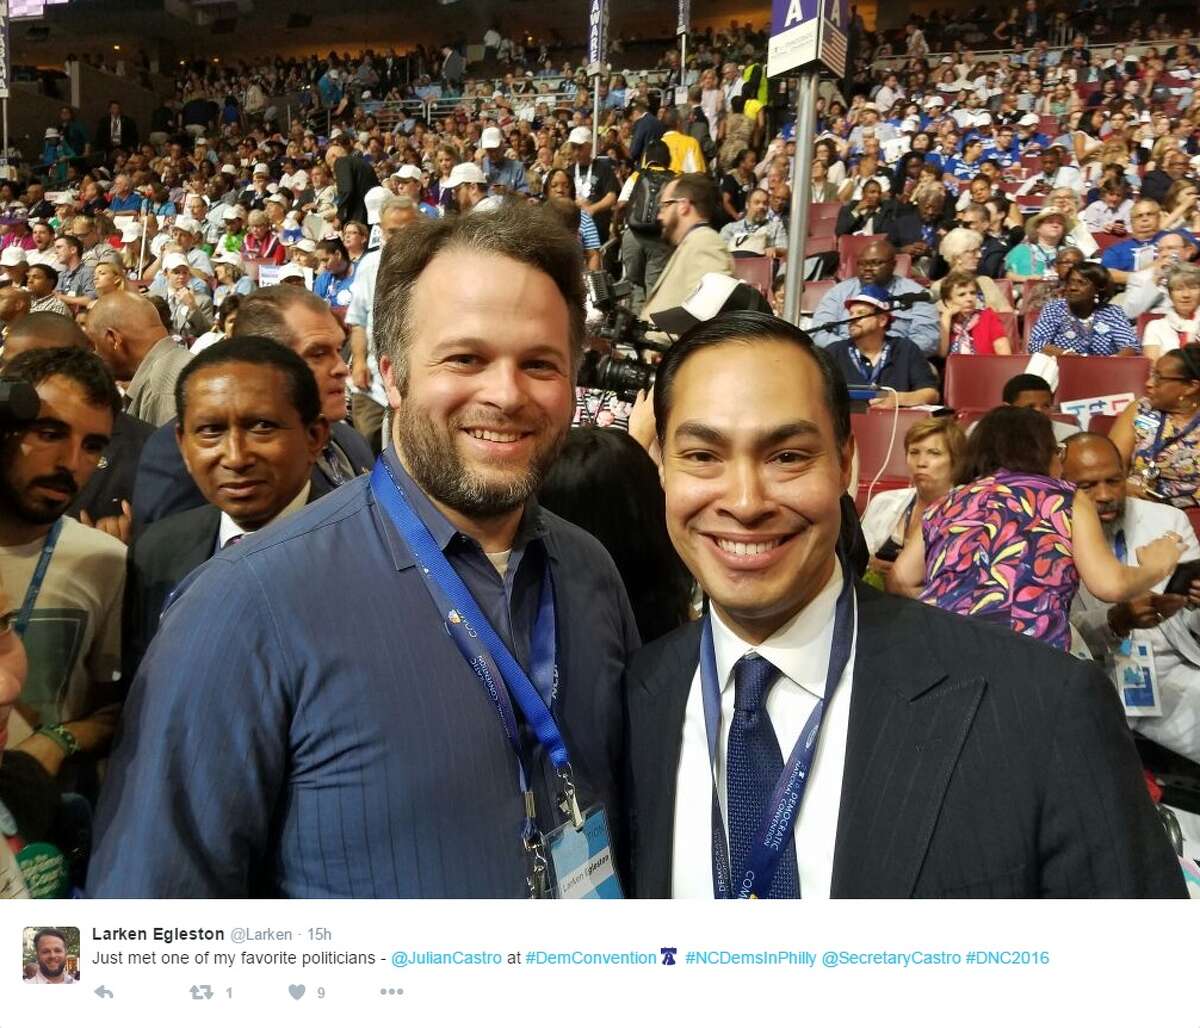 @Larken: "Just met one of my favorite politicians - @JulianCastro at #DemConvention #NCDemsInPhilly @SecretaryCastro #DNC2016"